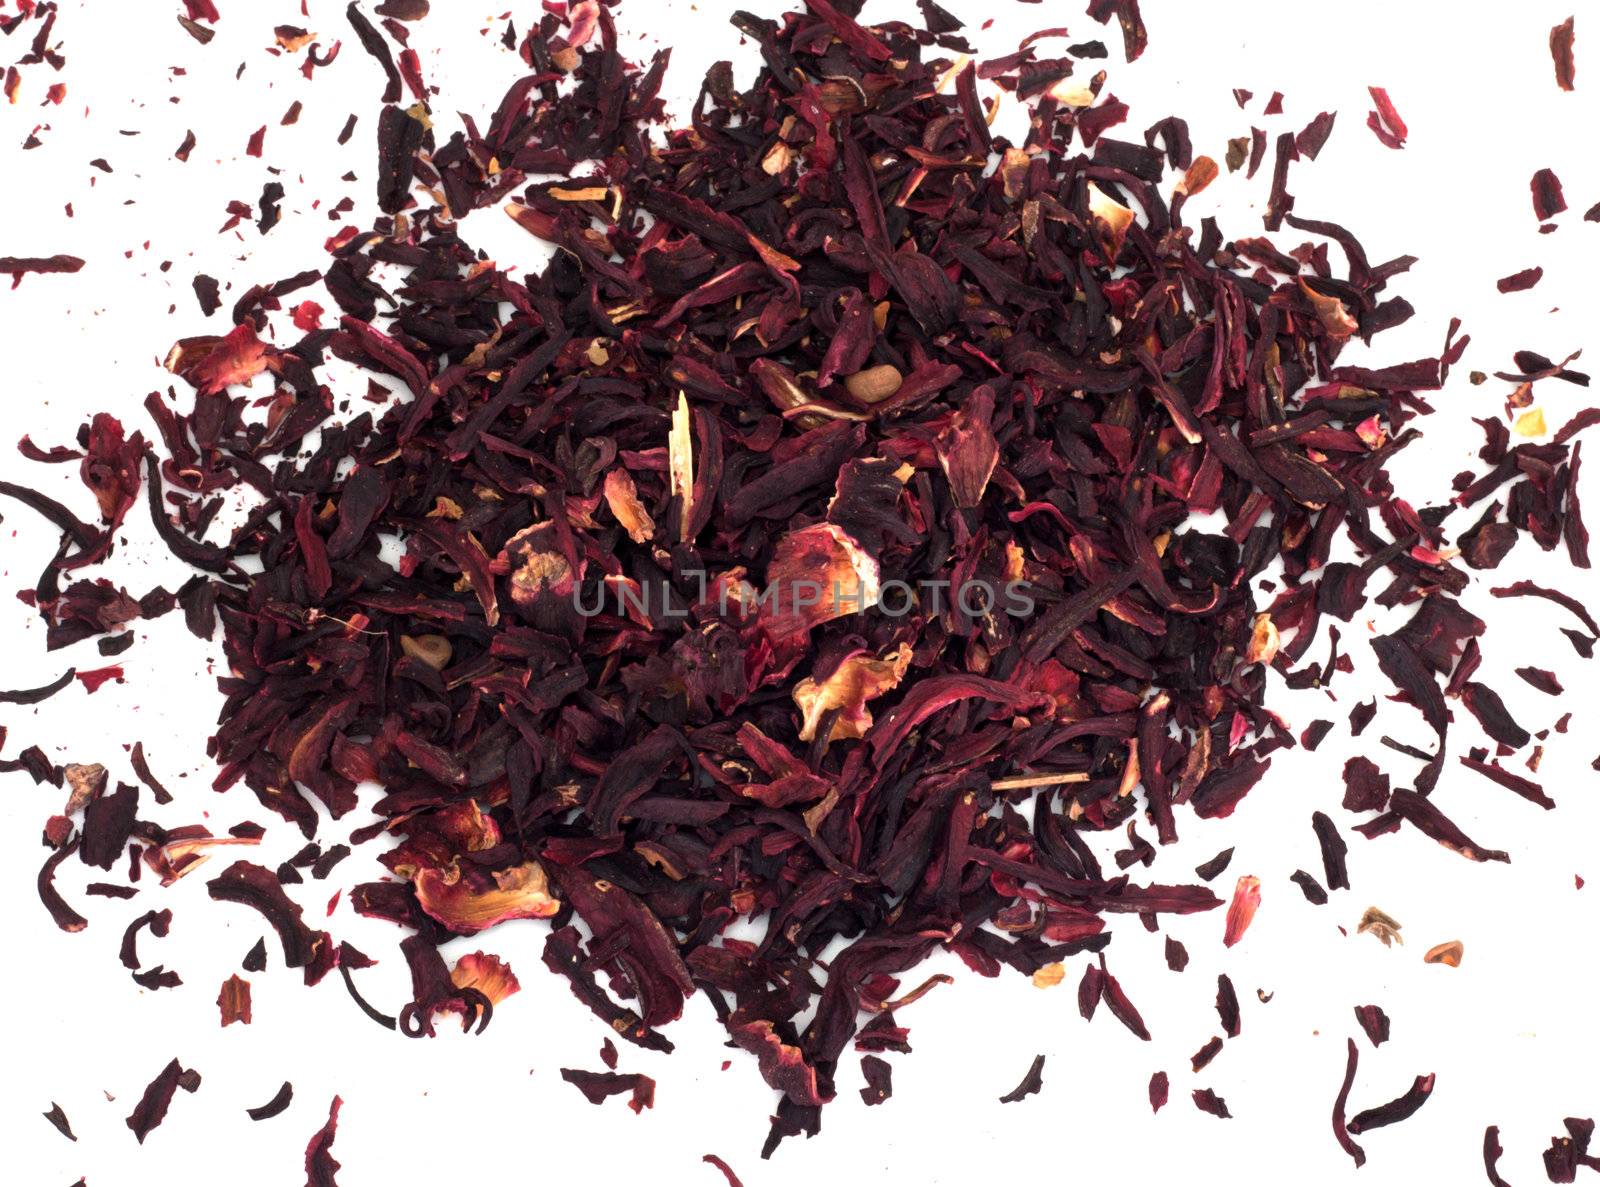 Hibiscus red tea,also known as carcade on white background  by schankz